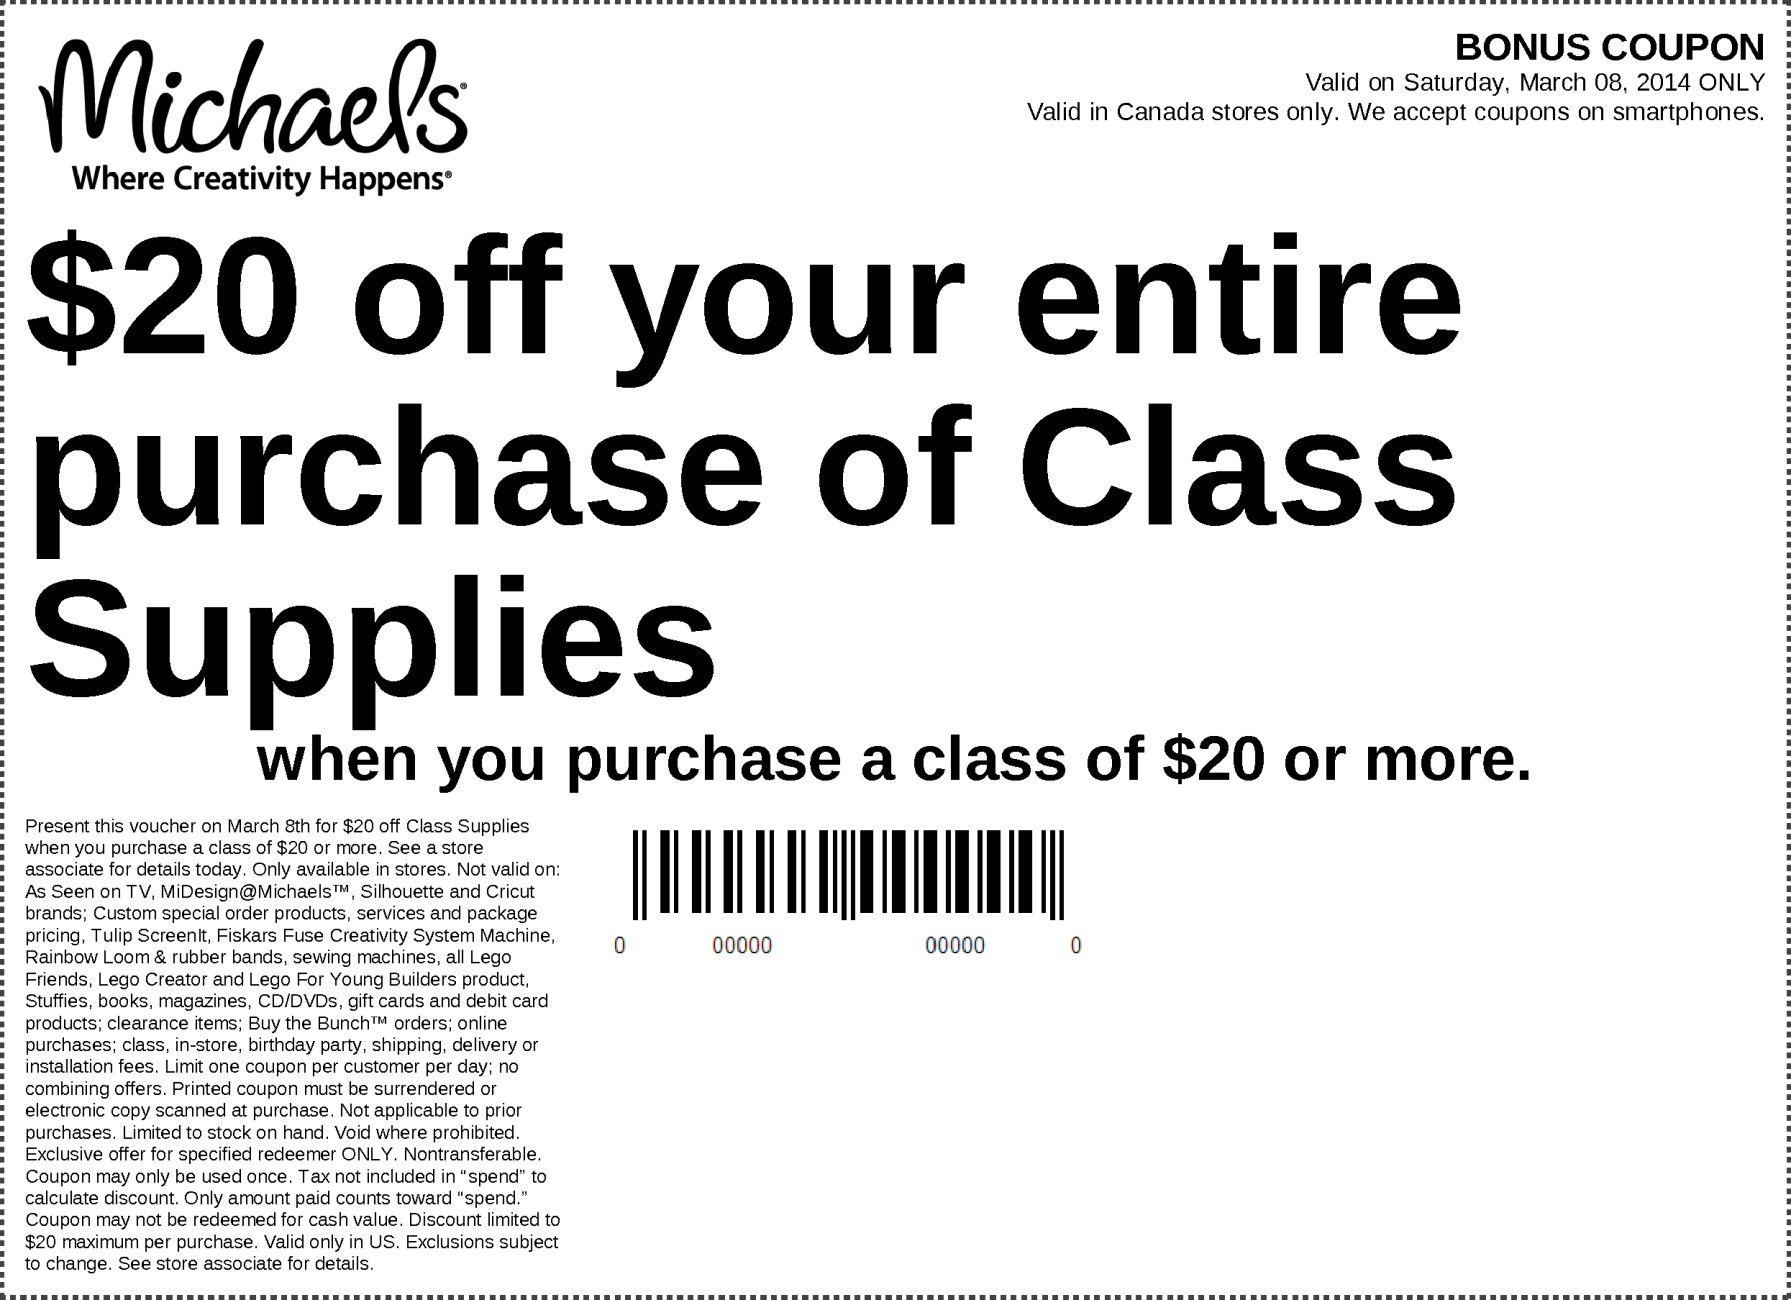 hot-michael-s-canada-printable-coupon-save-20-off-your-purchase-of-20-class-supplies-free